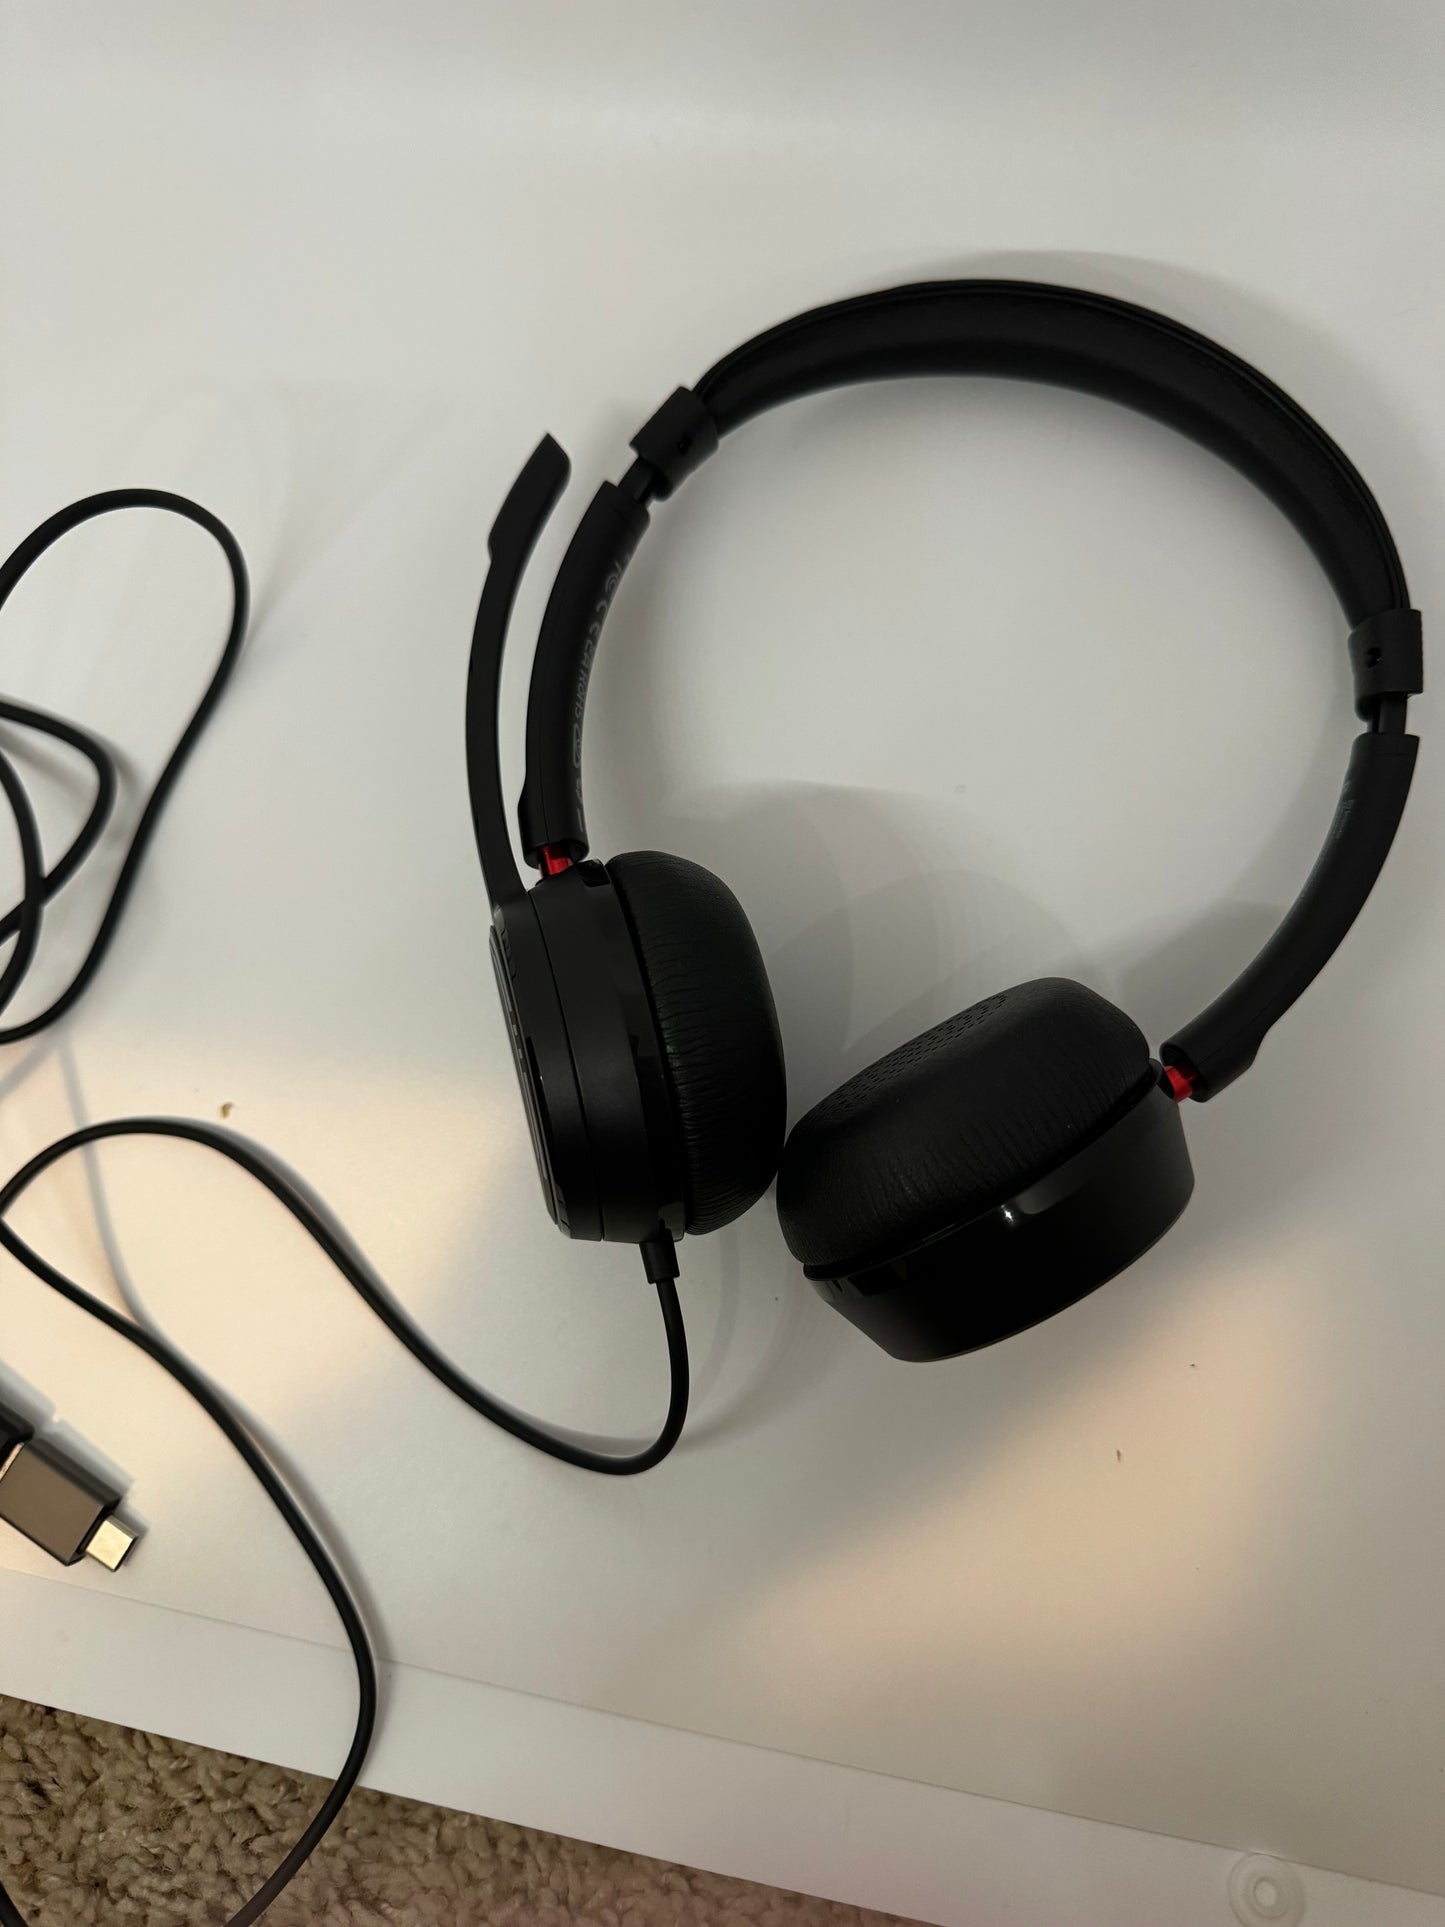 The picture shows a pair of black headphones. The headphones have a cushioned over-ear design and a black adjustable headband. There is a microphone attached to the left side of the headphones. The headphones are connected to a black cable, which has a USB connector at the end. The headphones are placed on a white surface, and there is a beige carpet visible in the bottom part of the picture.